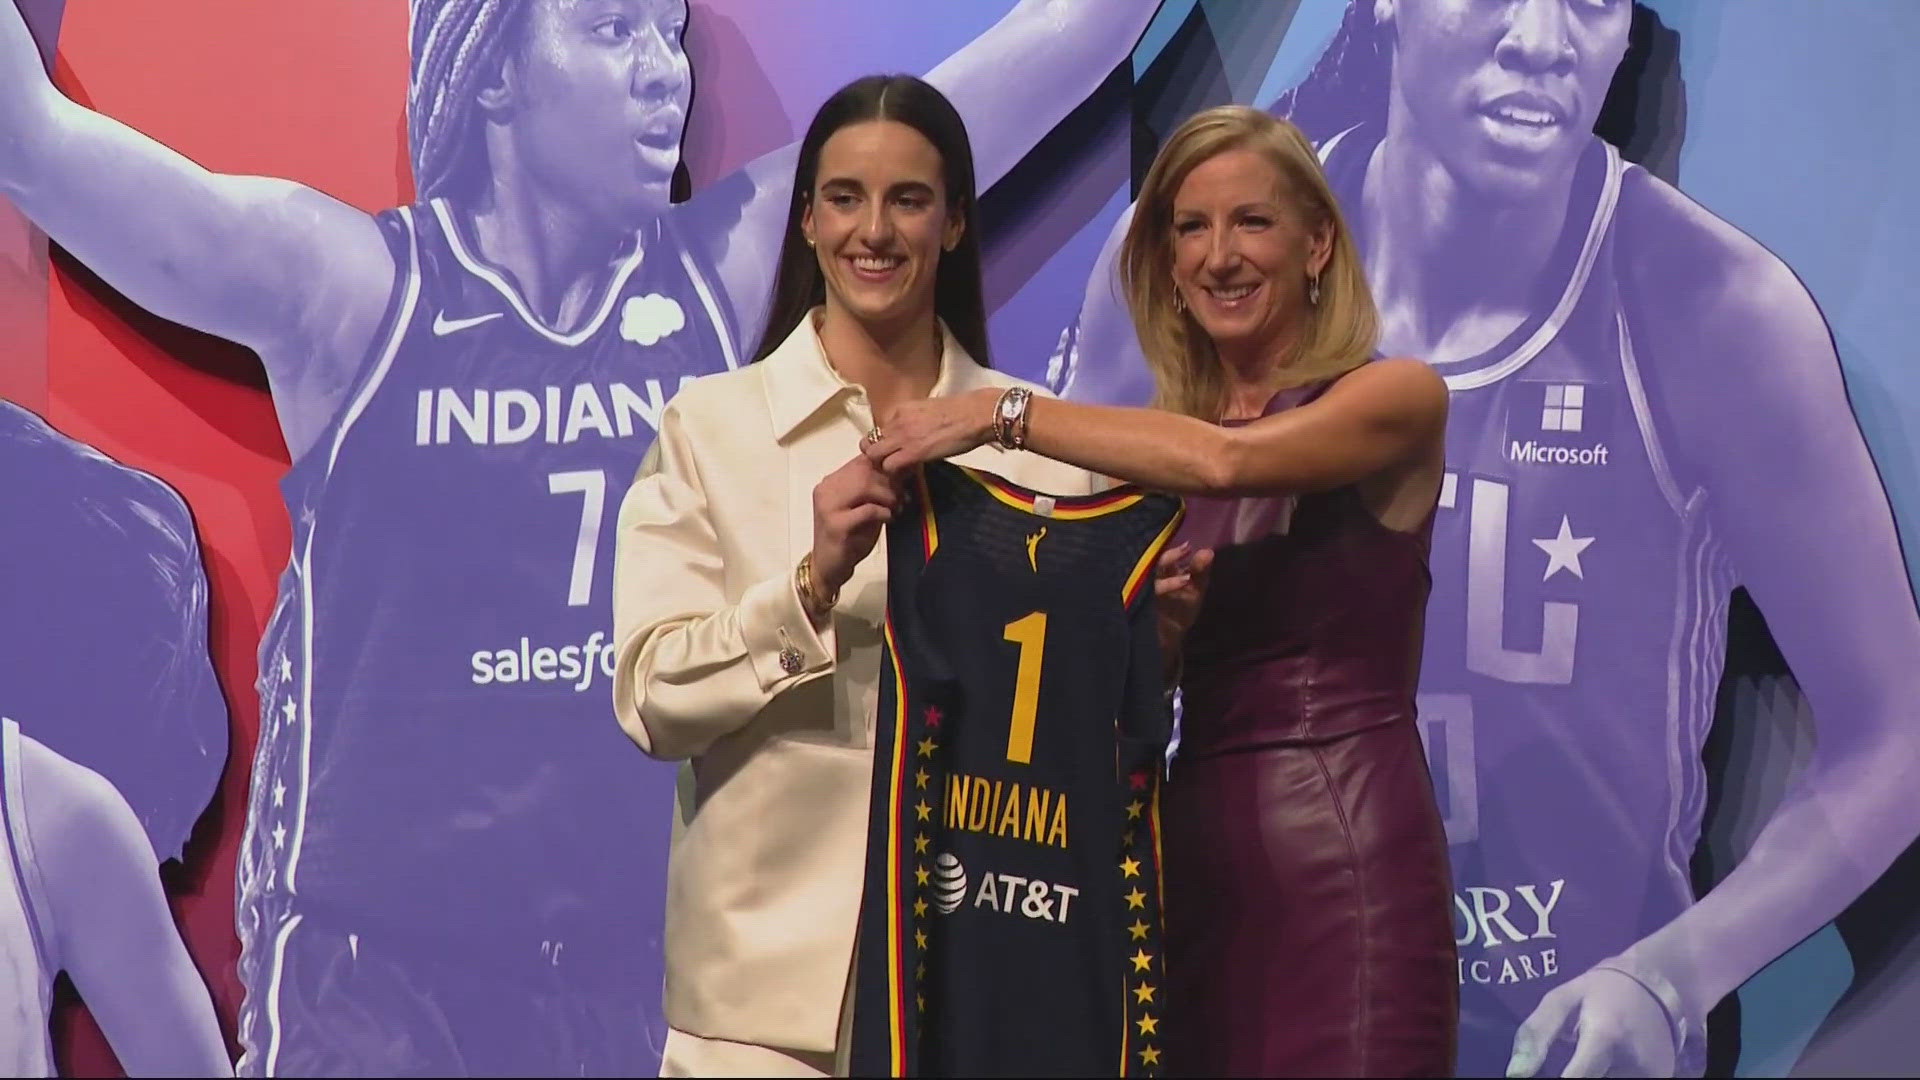 Clark will earn $388,000 over ten years playing for the Indiana Fever, in contrast to the $55 million four-year contract of last year's NBA draft pick.